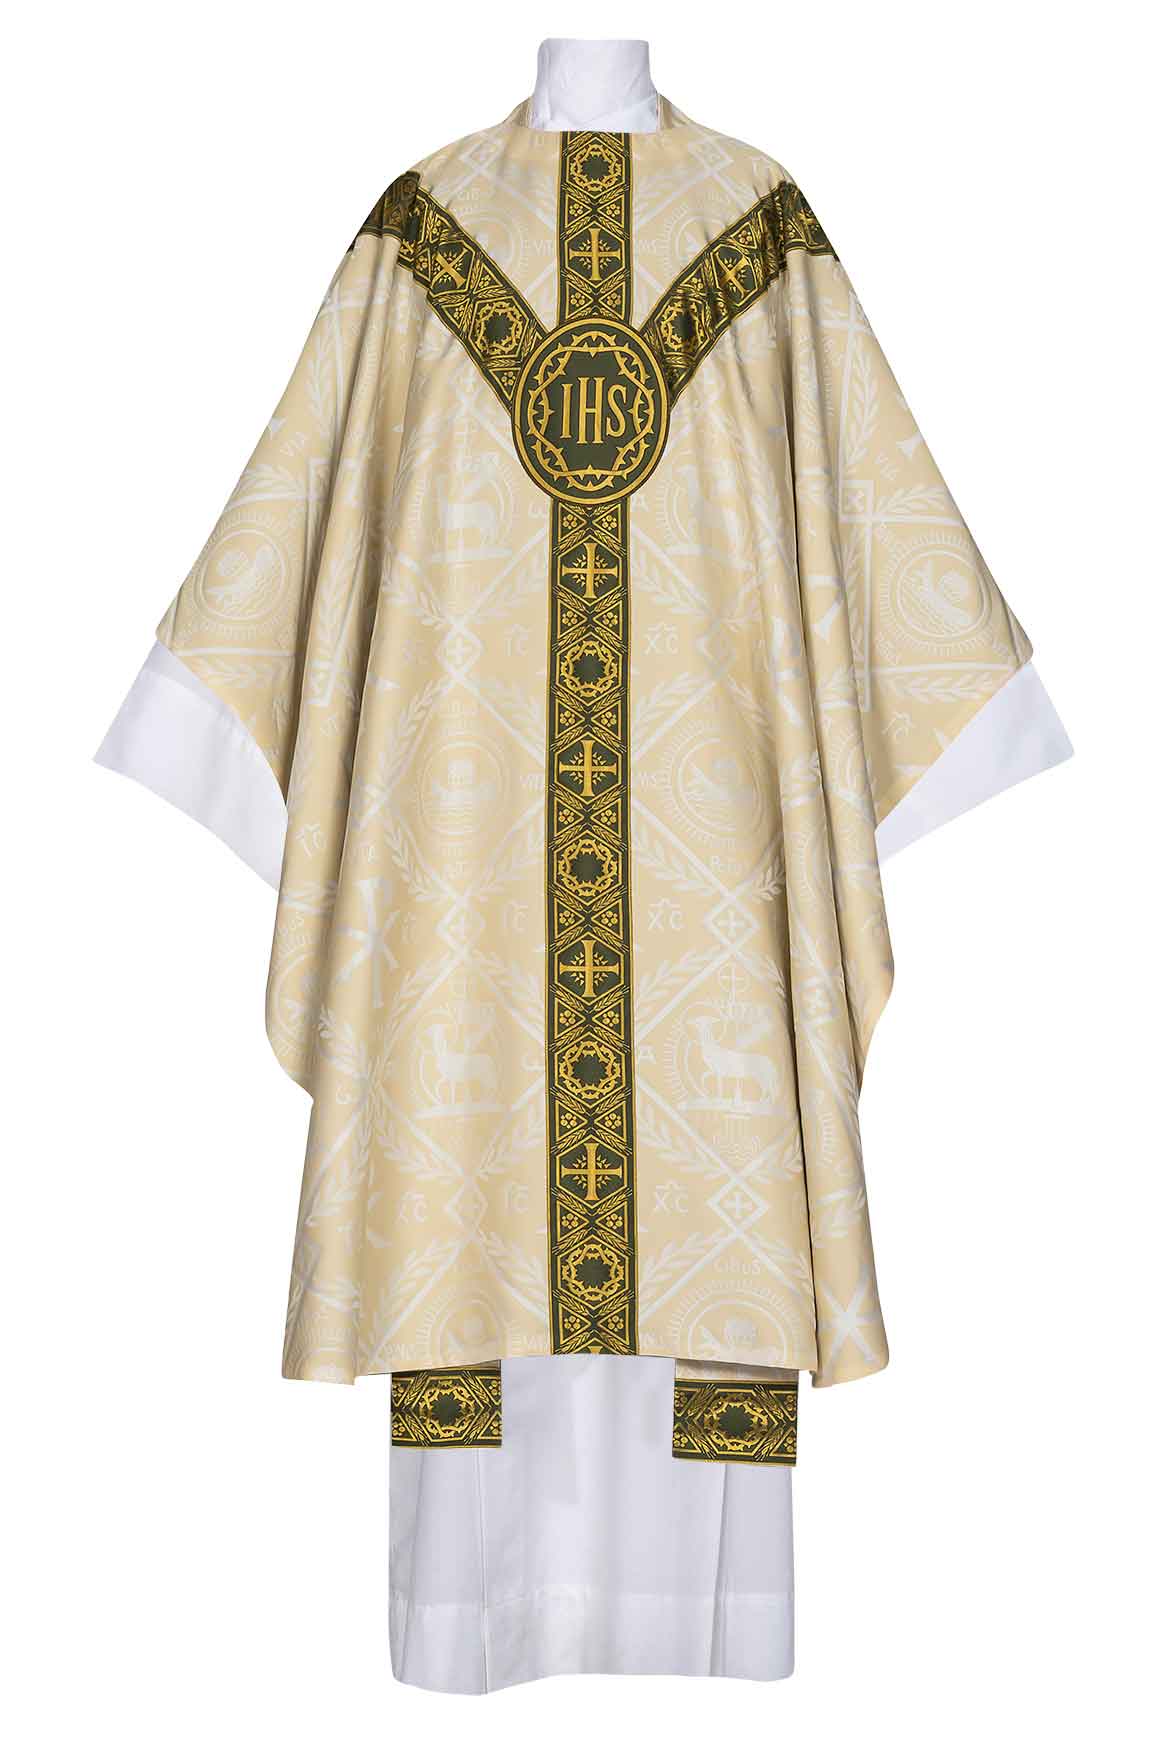 Crown of Thorns Chasuble